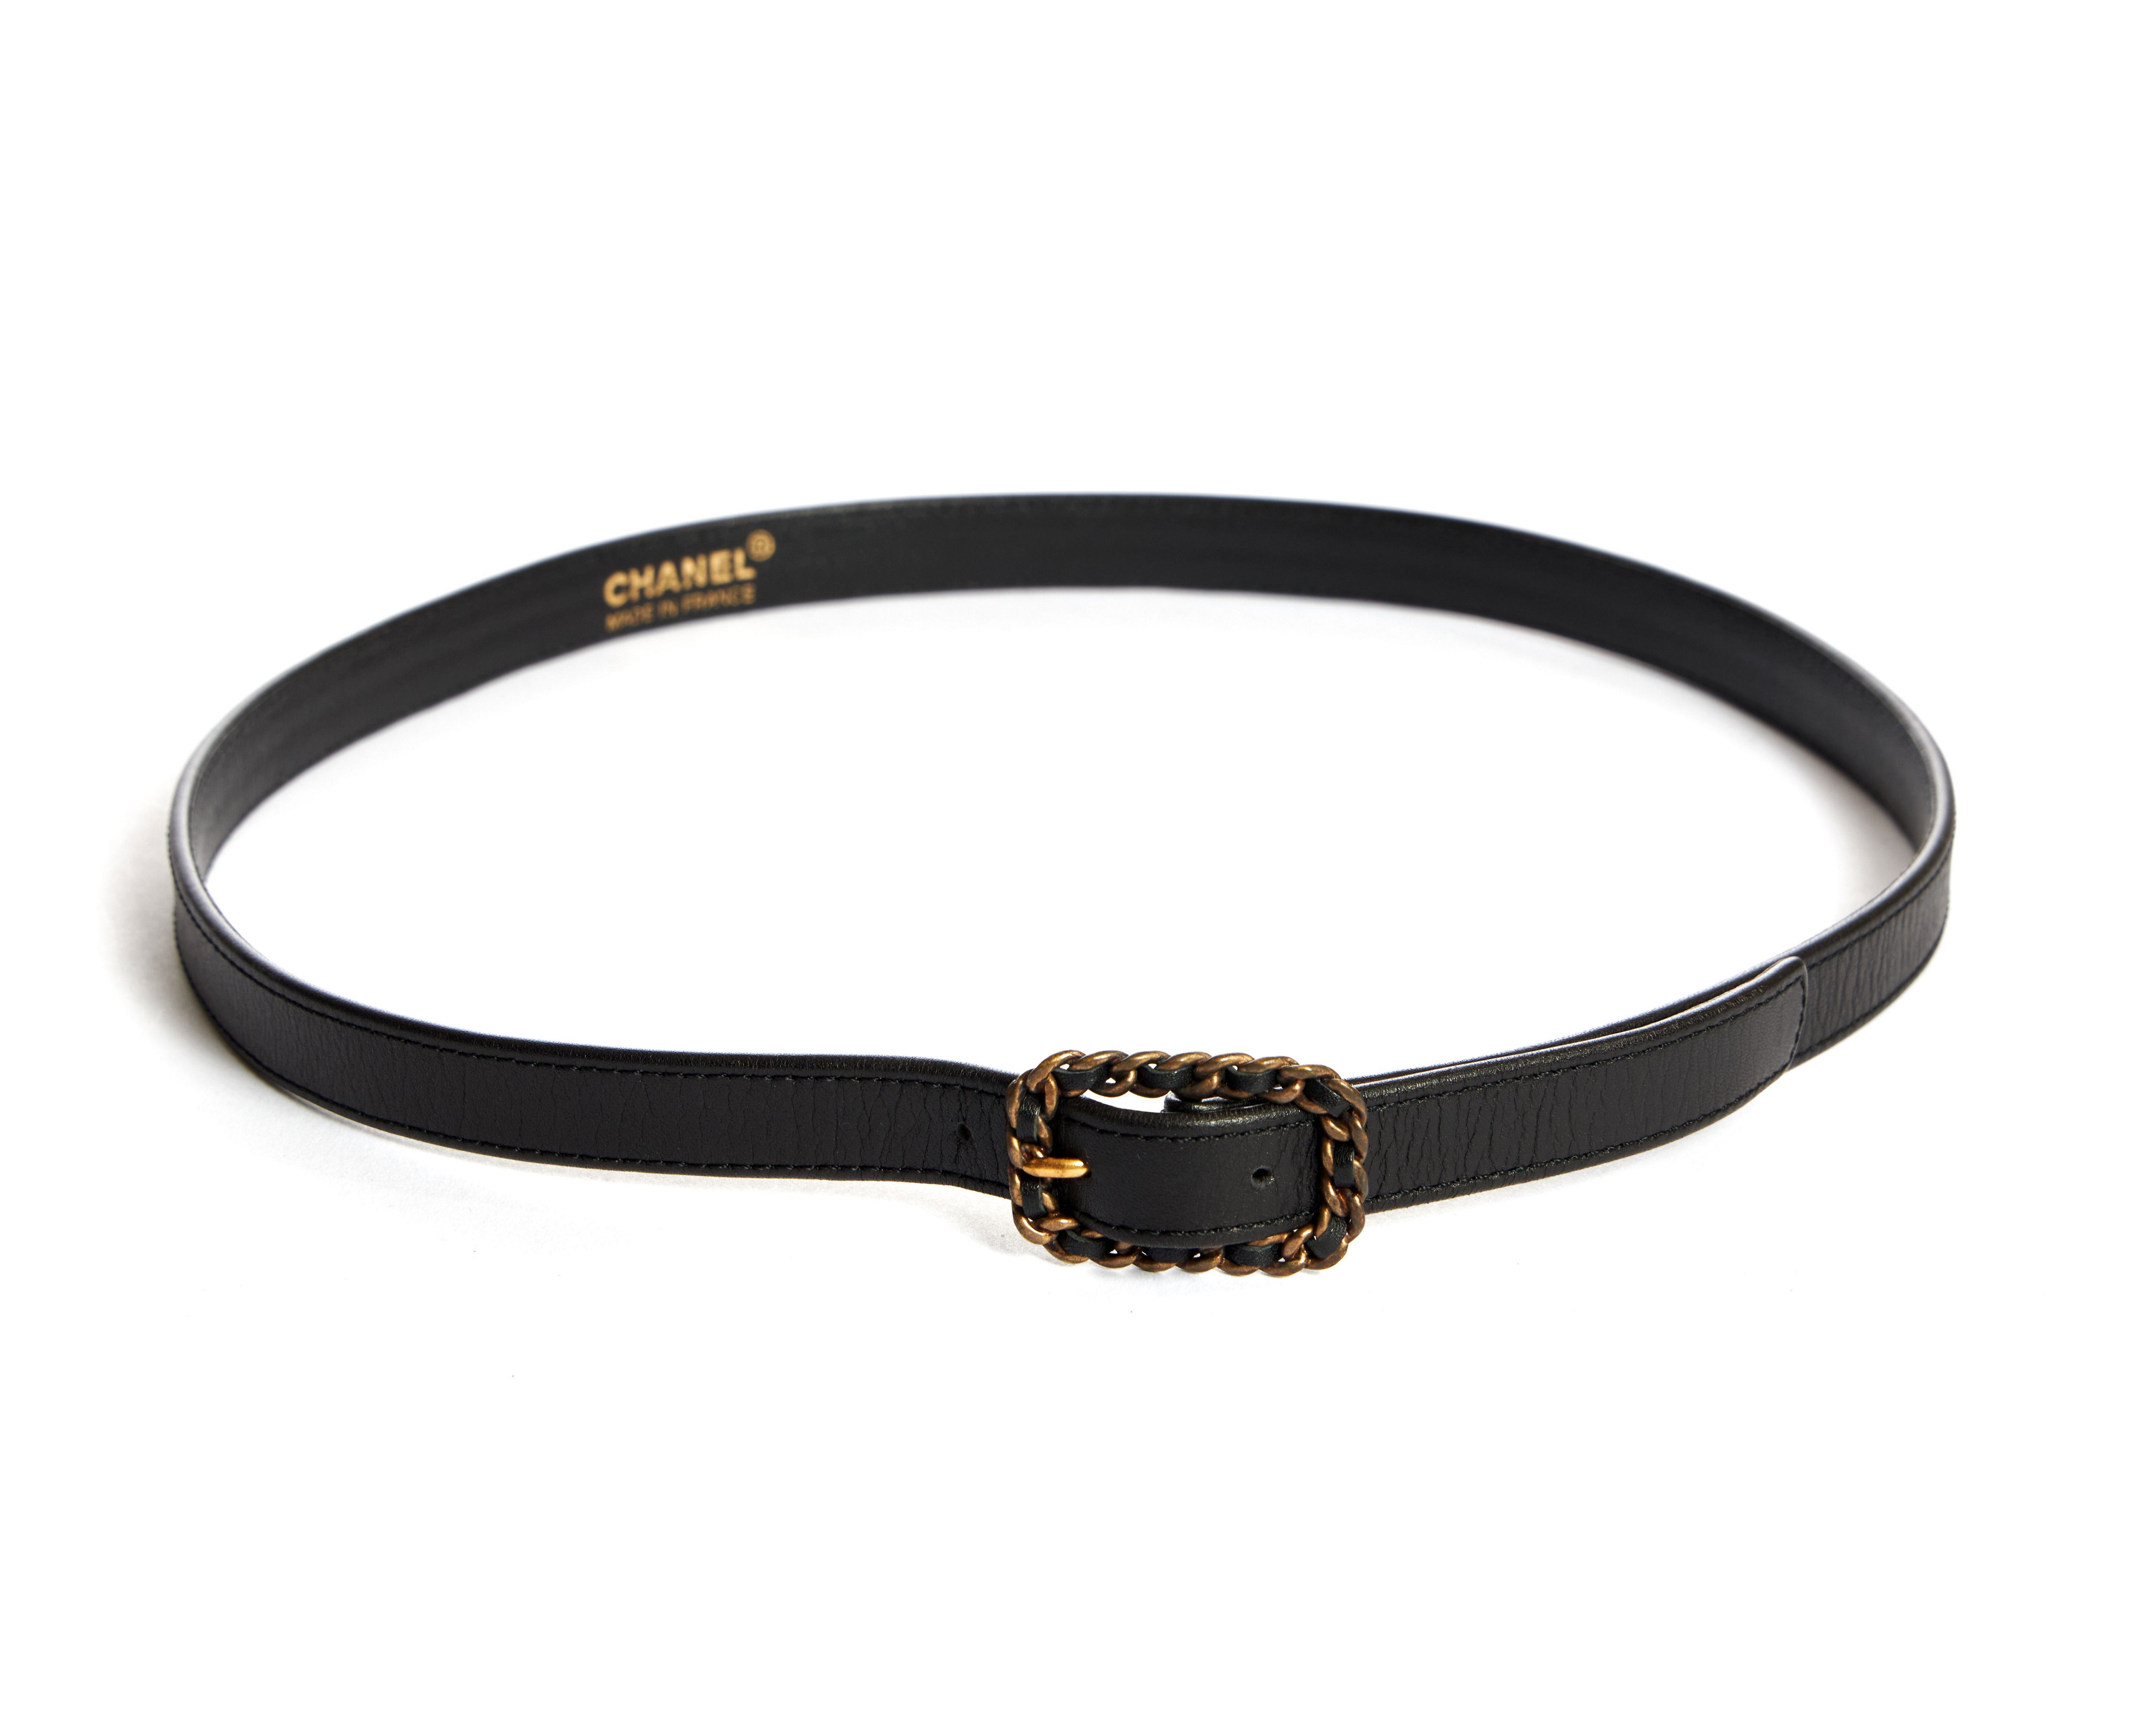 Chanel Thin Black Belt With Chain Buckle~P77606886